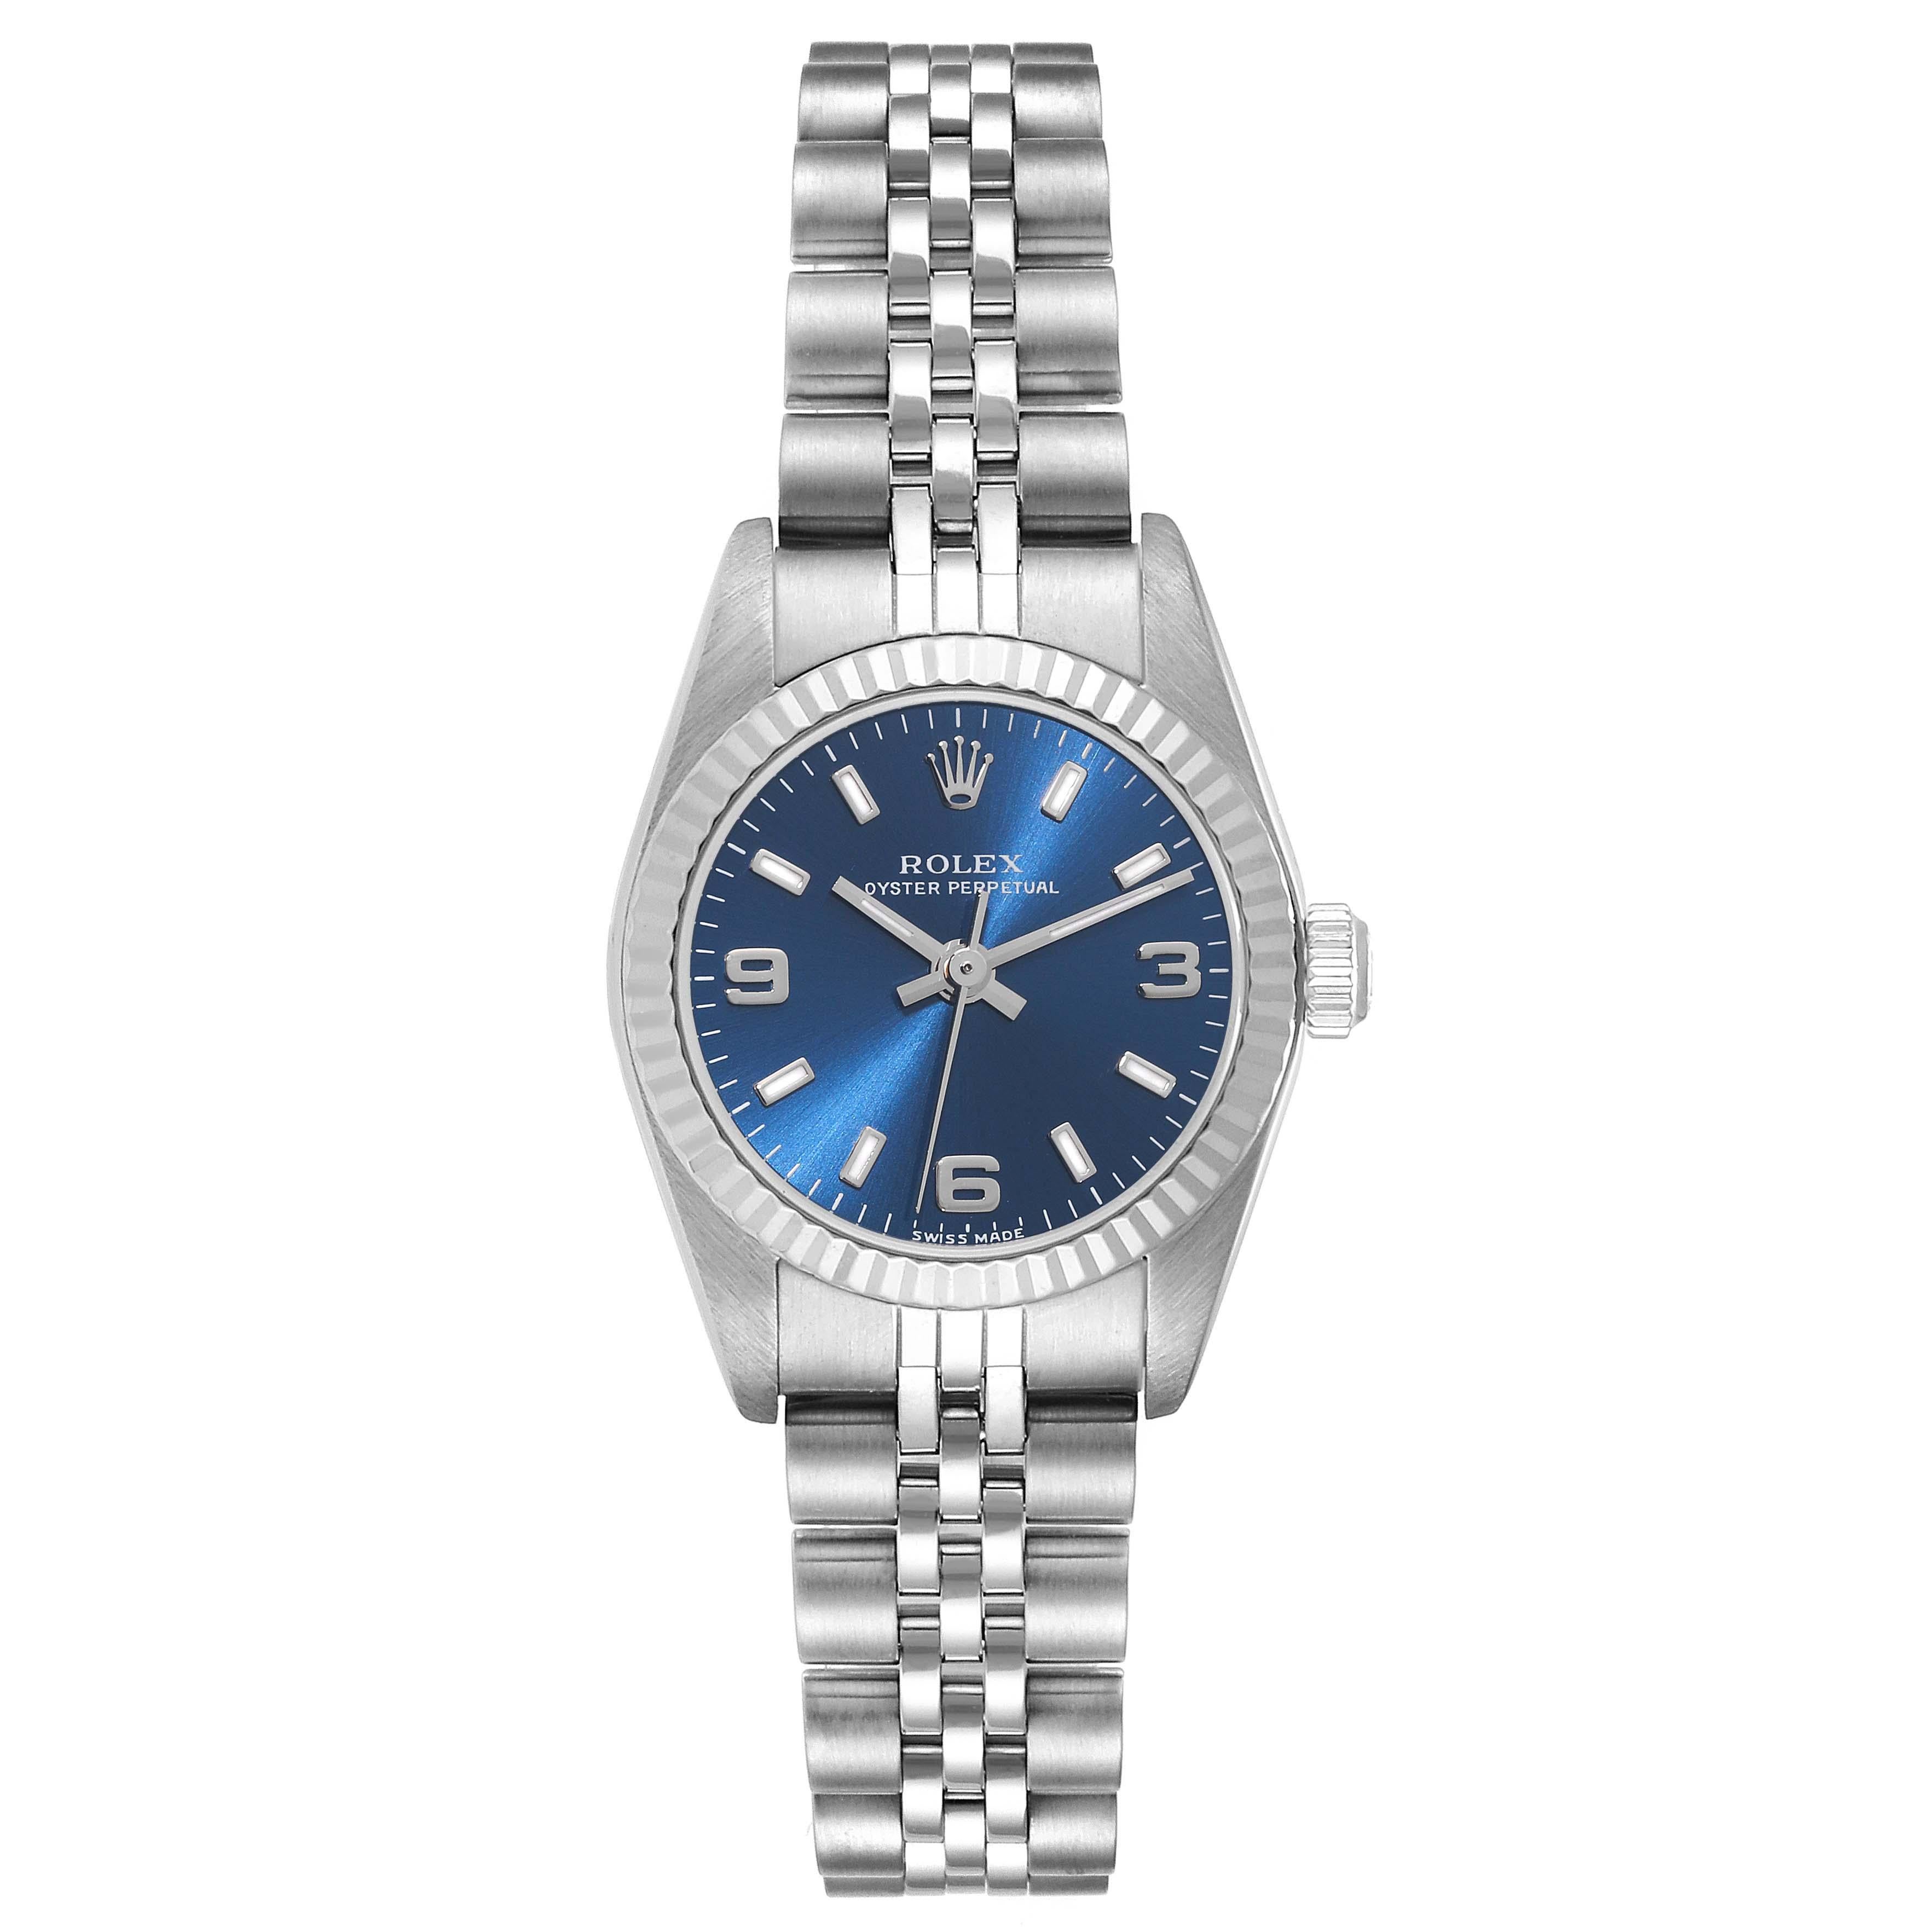 Rolex Oyster Perpetual Blue Dial Steel White Gold Ladies Watch 76094. Officially certified chronometer automatic self-winding movement. Stainless steel oyster case 24.0 mm in diameter. Rolex logo on a crown. 18k white gold fluted bezel. Scratch